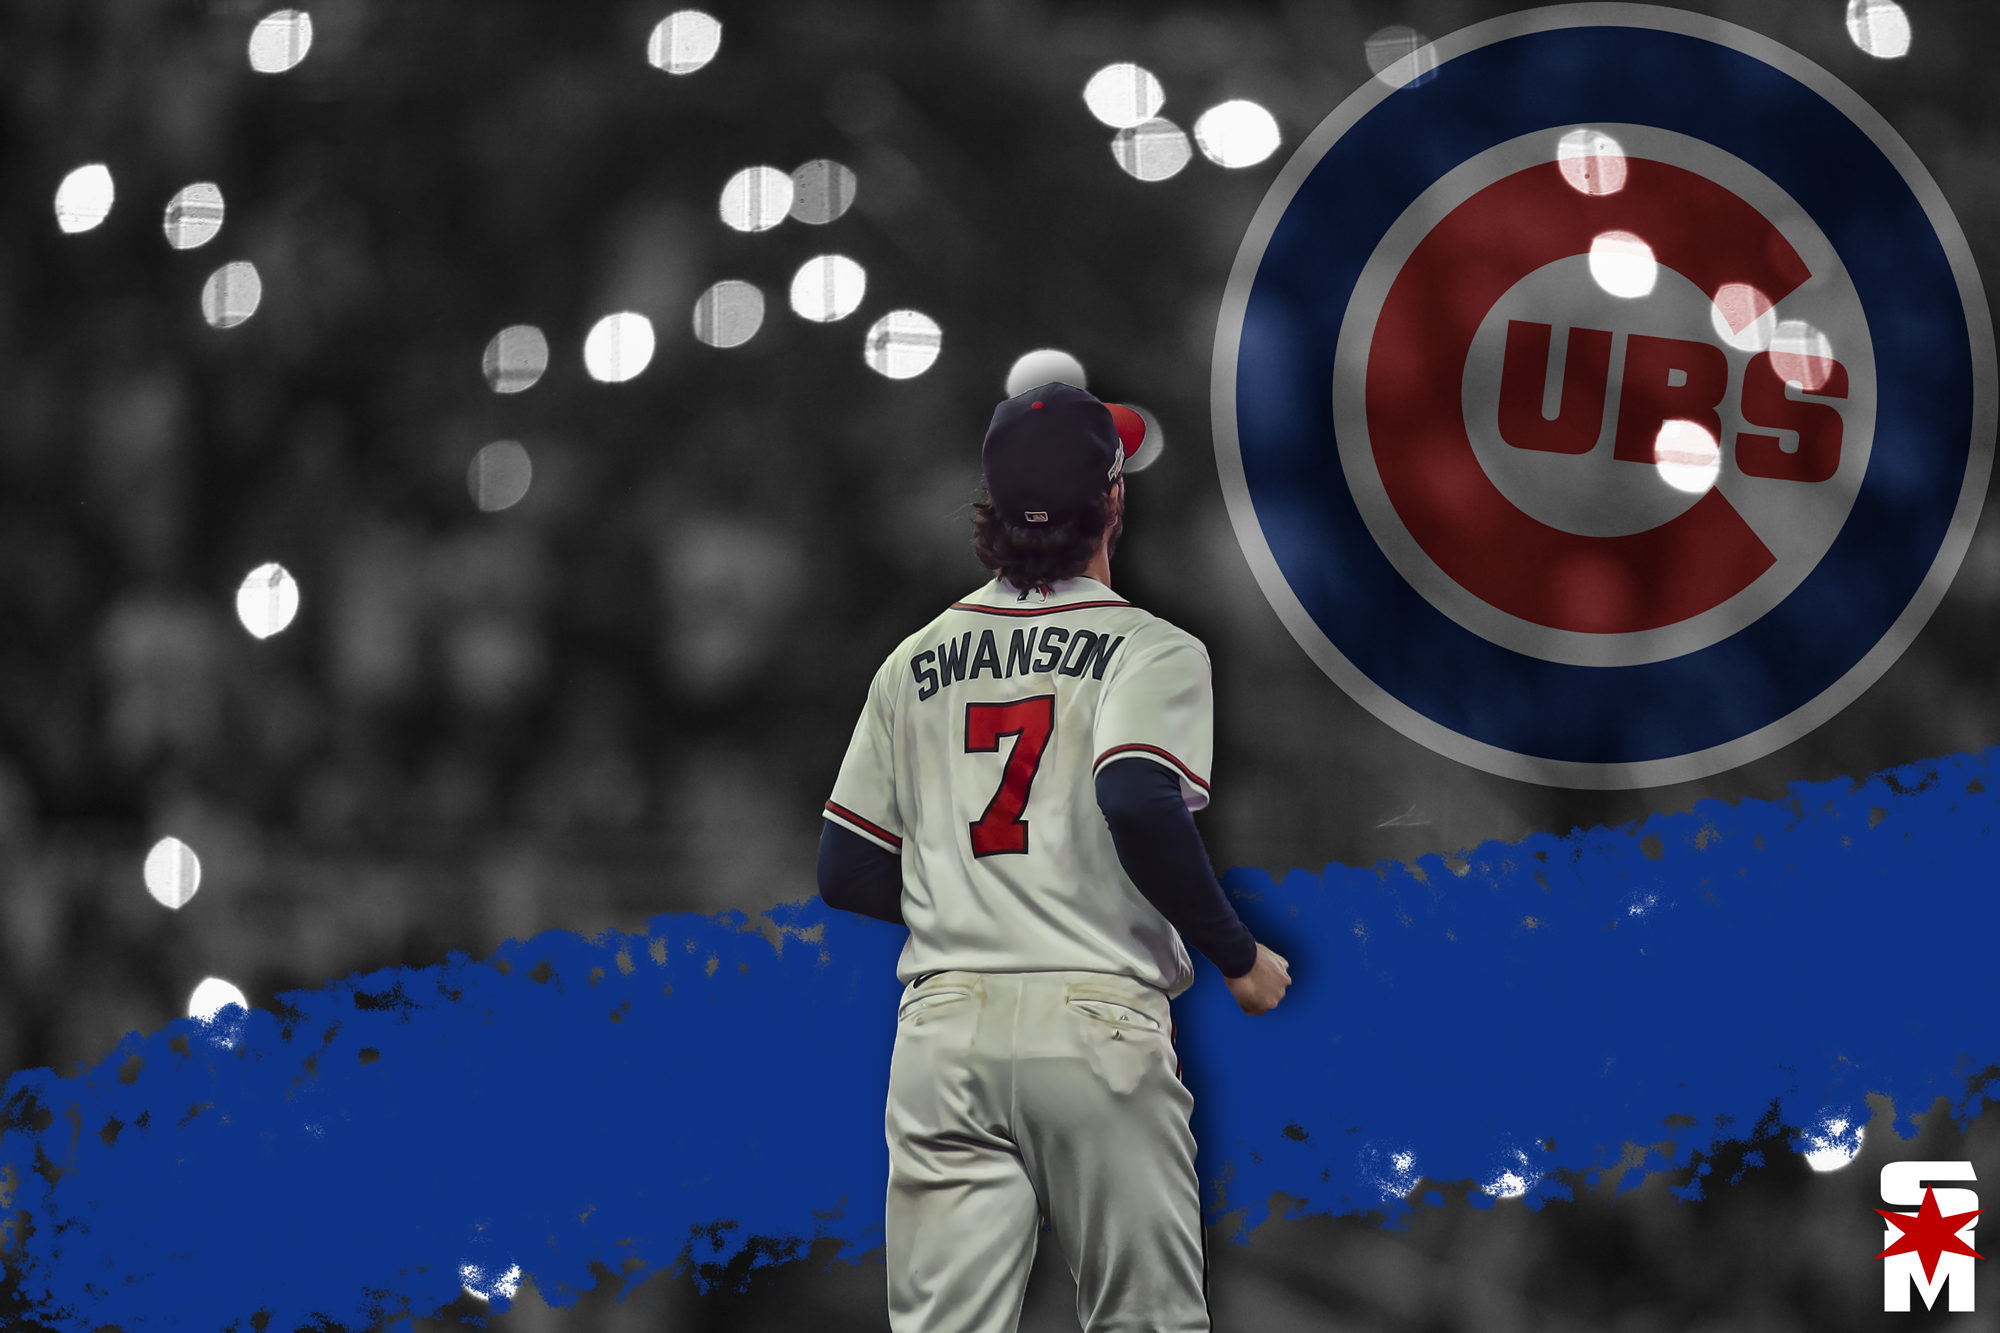 Cubs Zone on X: Retweet if you want Dansby Swanson in a #Cubs